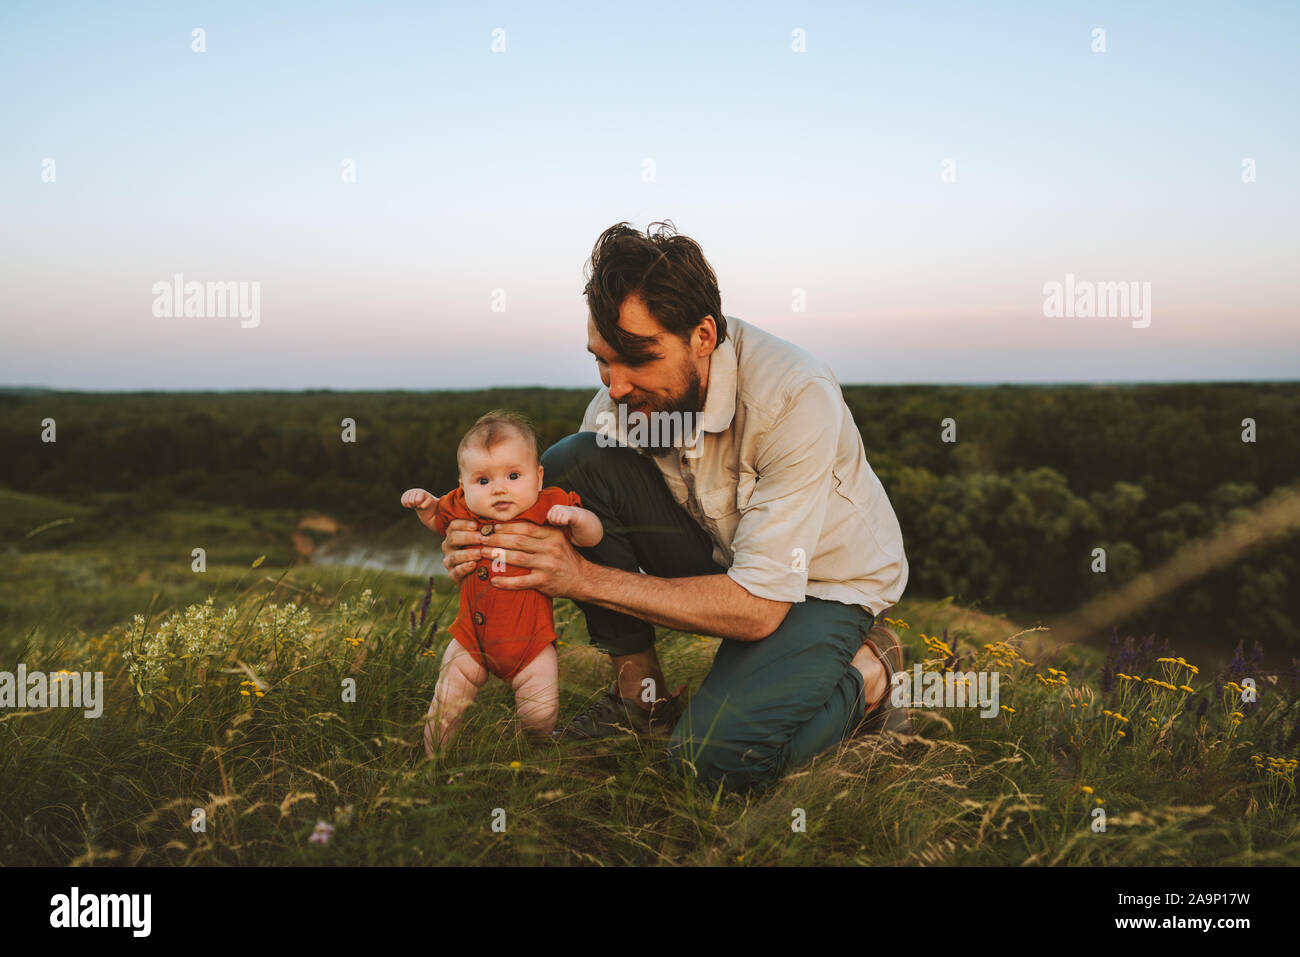 Baby and father outdoor happy family lifestyle dad and child walking together on grass meadow parenting childhood concept Fathers day holiday Stock Photo